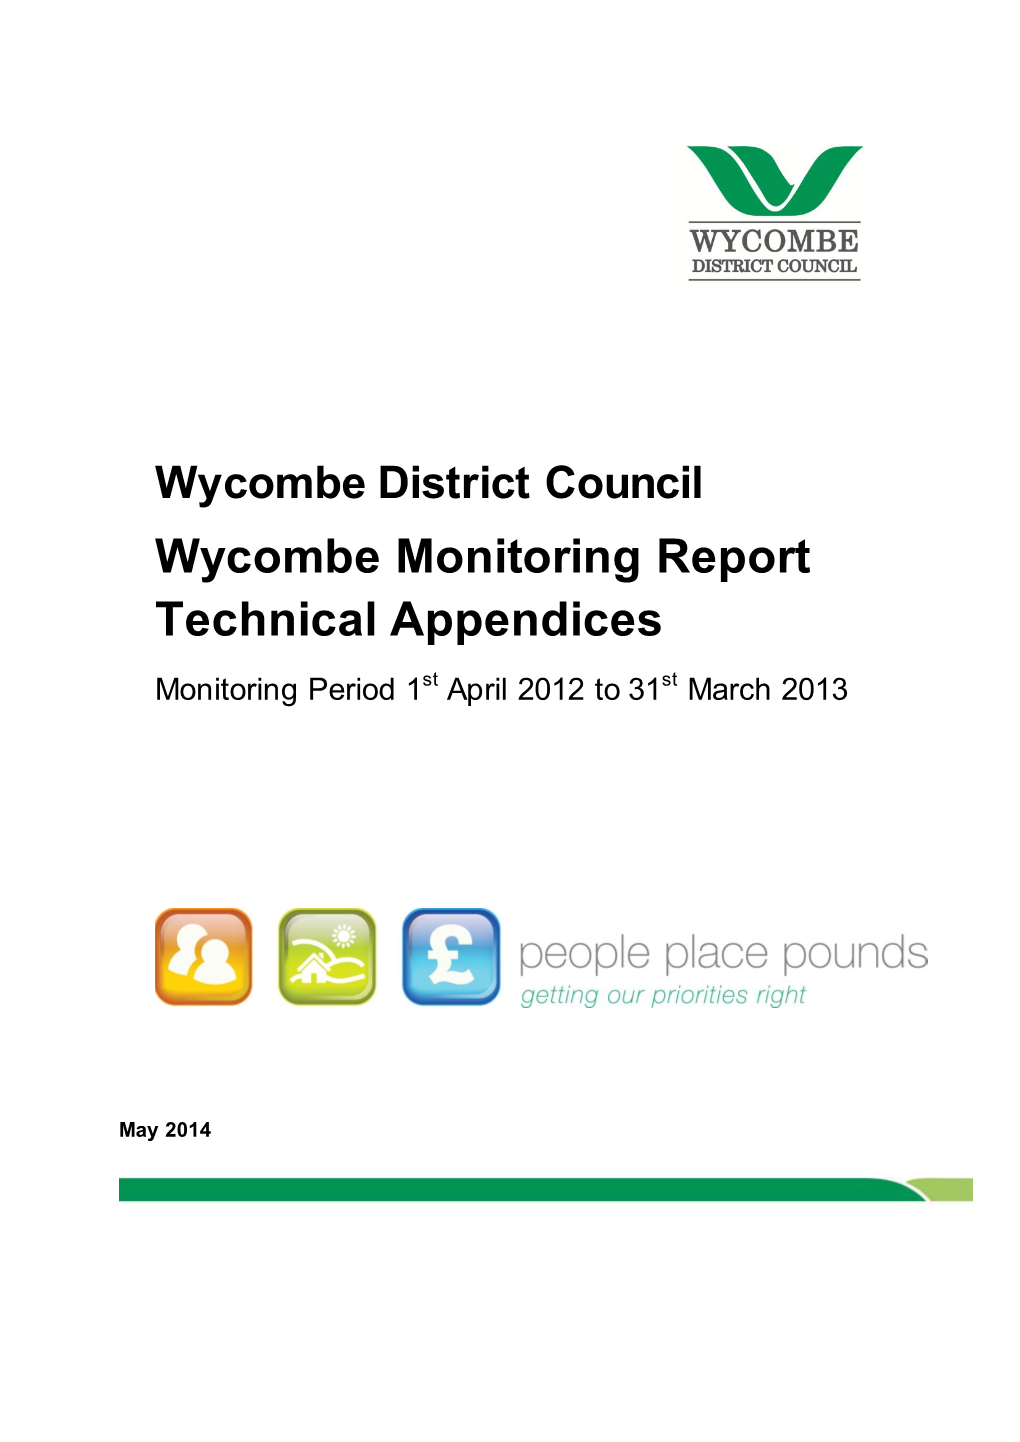 Wycombe Monitoring Report Technical Appendices Monitoring Period 1St April 2012 to 31St March 2013